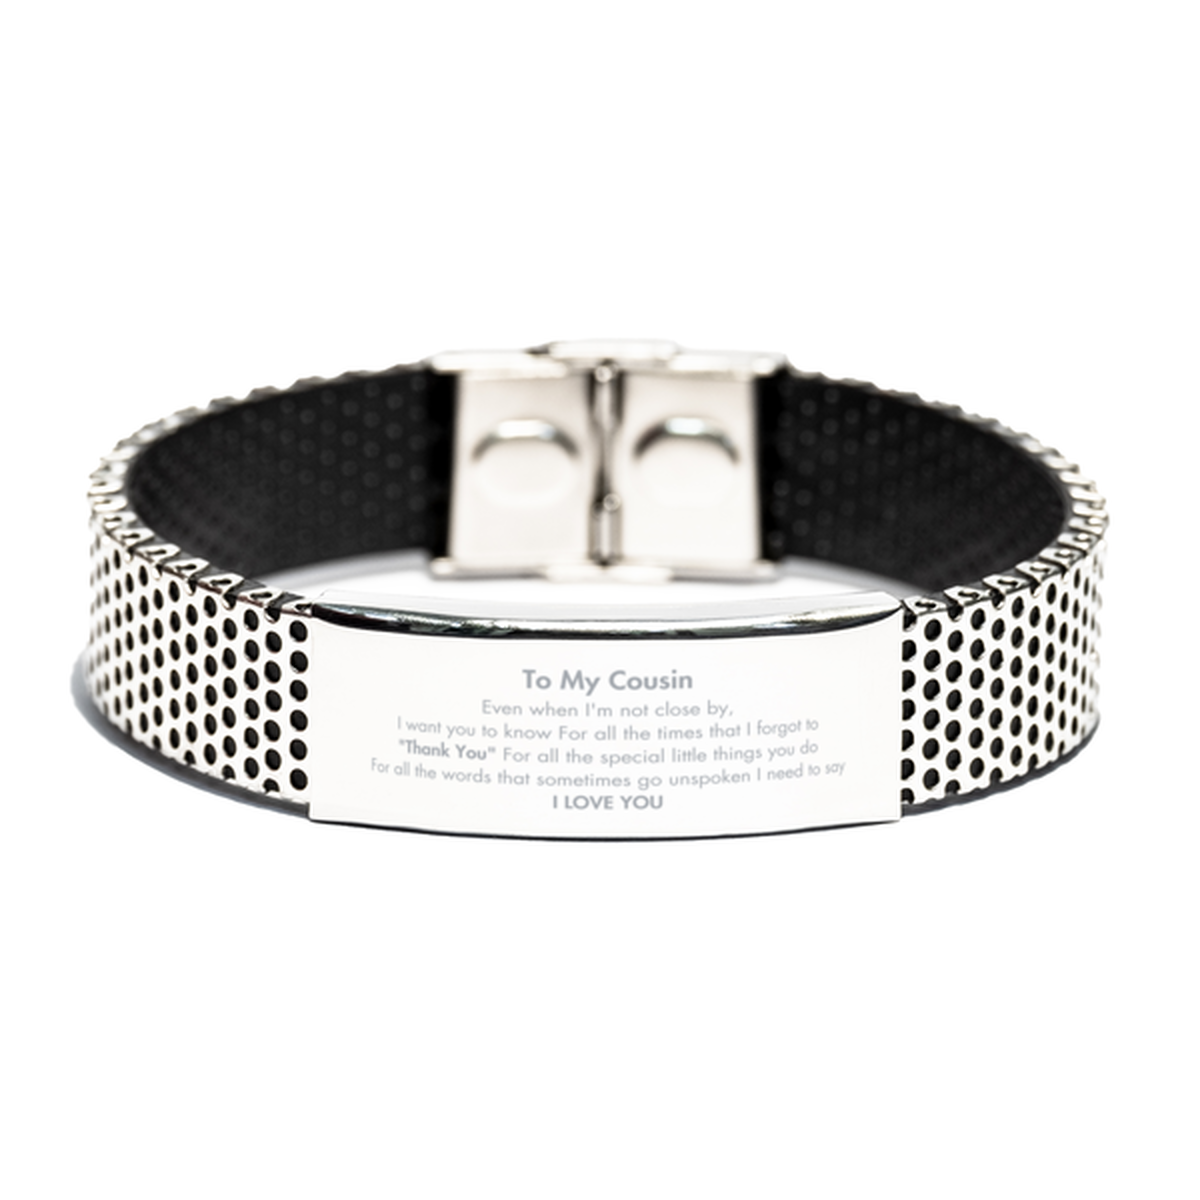 Thank You Gifts for Cousin, Keepsake Stainless Steel Bracelet Gifts for Cousin Birthday Mother's day Father's Day Cousin For all the words That sometimes go unspoken I need to say I LOVE YOU